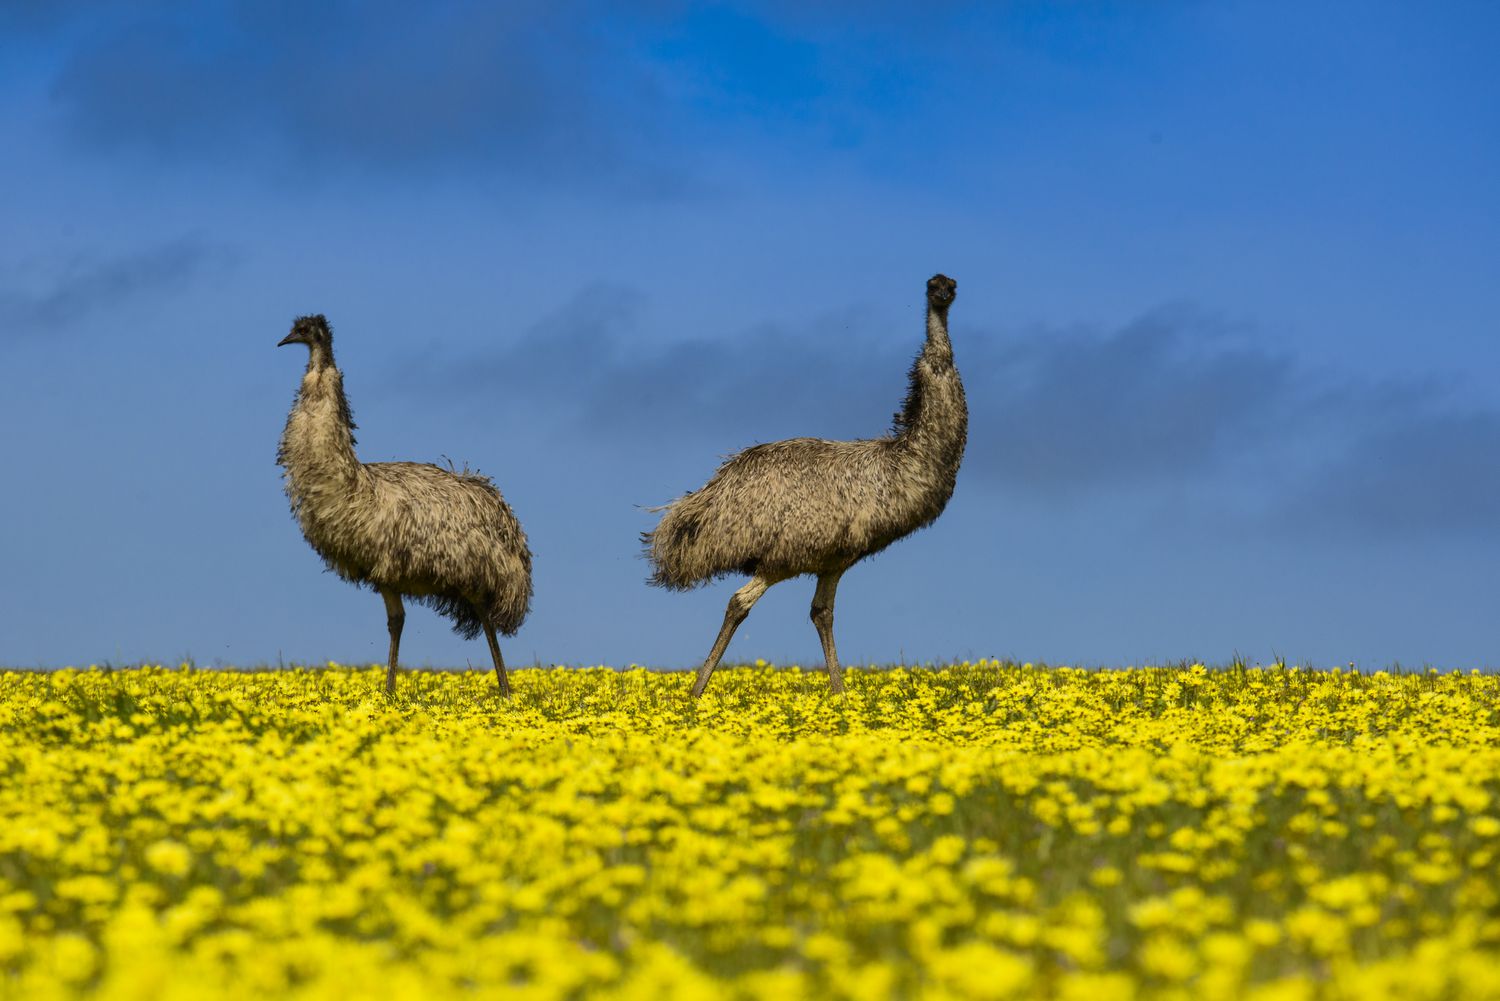 Australia, Port Lincoln, two emus standing in canola field